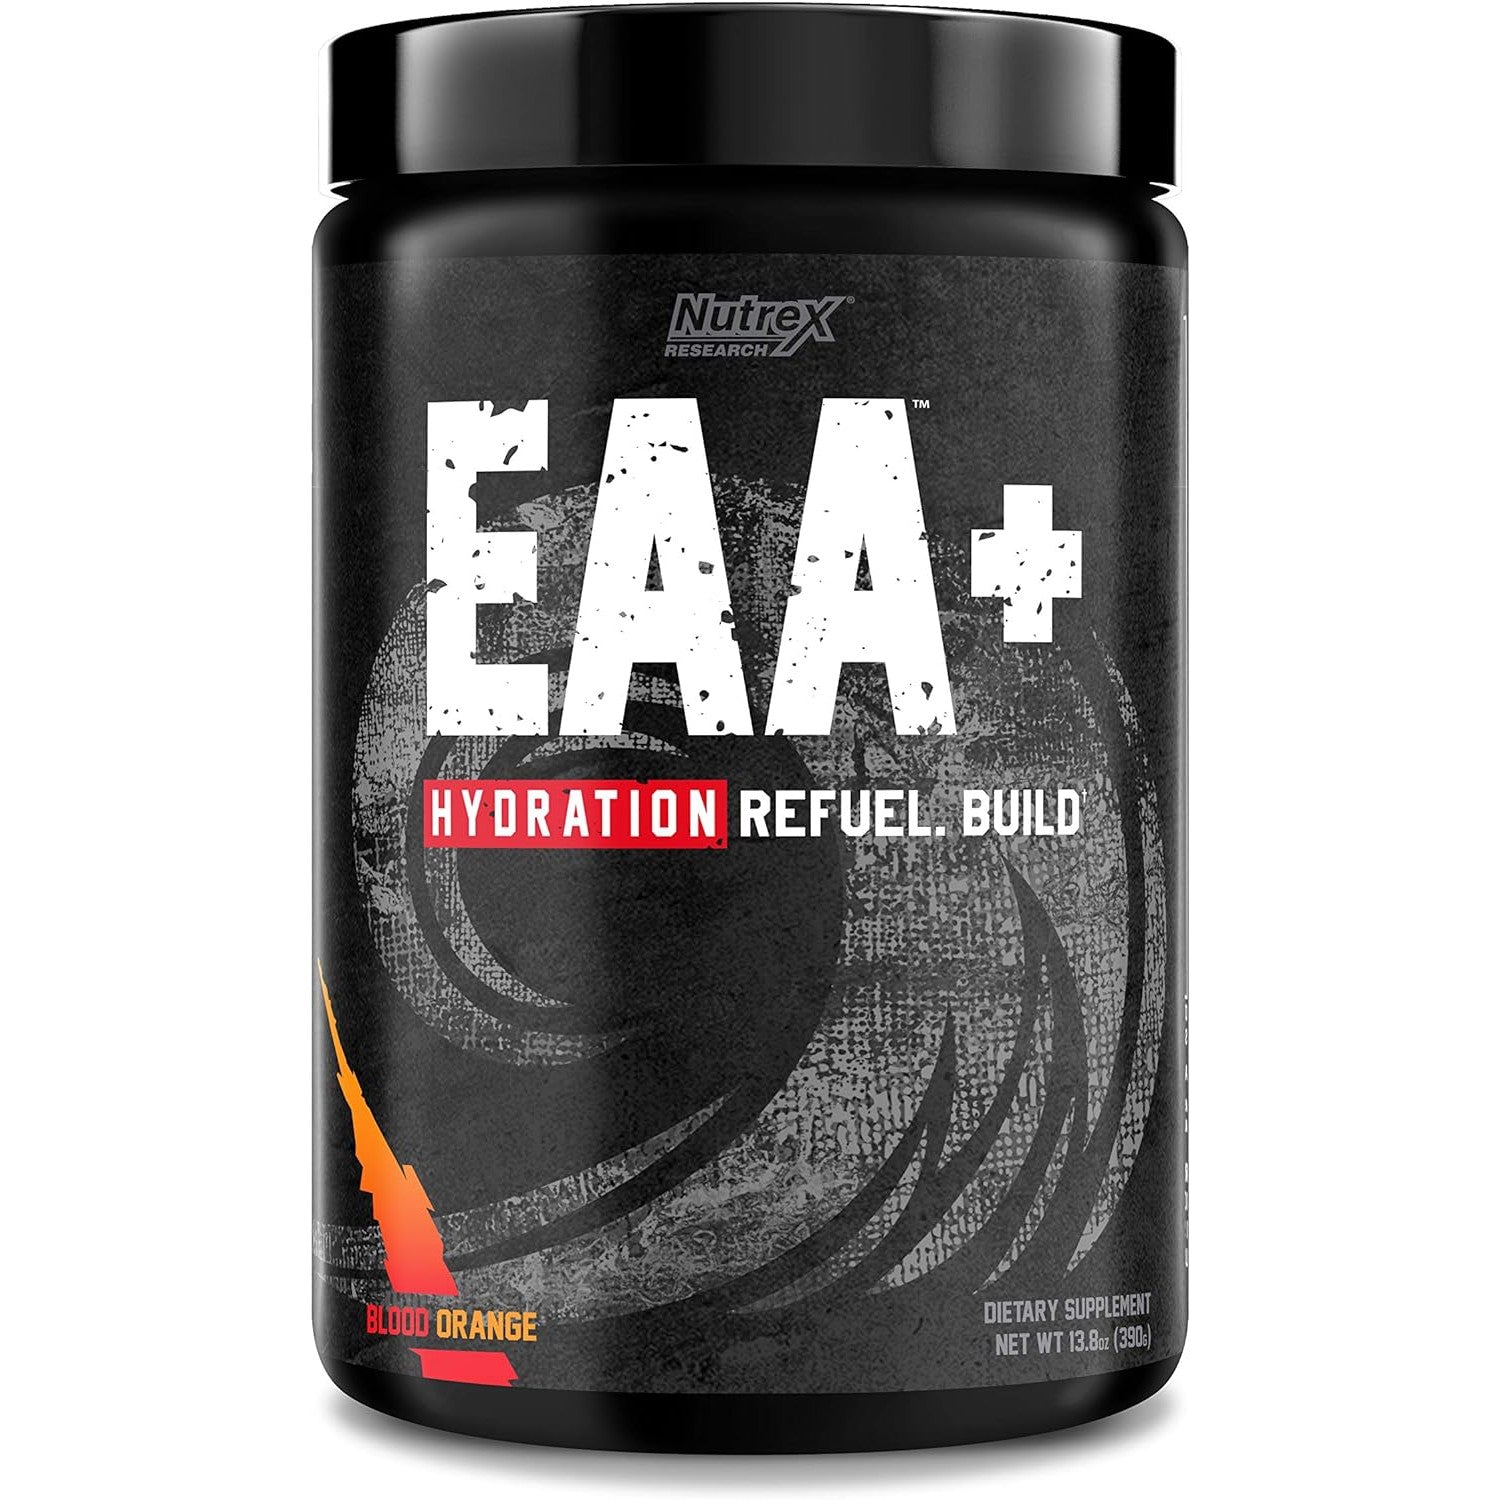 Nutrex Research EAA Hydration EAAs + BCAAs Powder with 8g Essential Amino Acids + Electrolytes For Muscle Recovery, Strength, Muscle Building, Endurance, Blood Orange Flavor 30 Serving